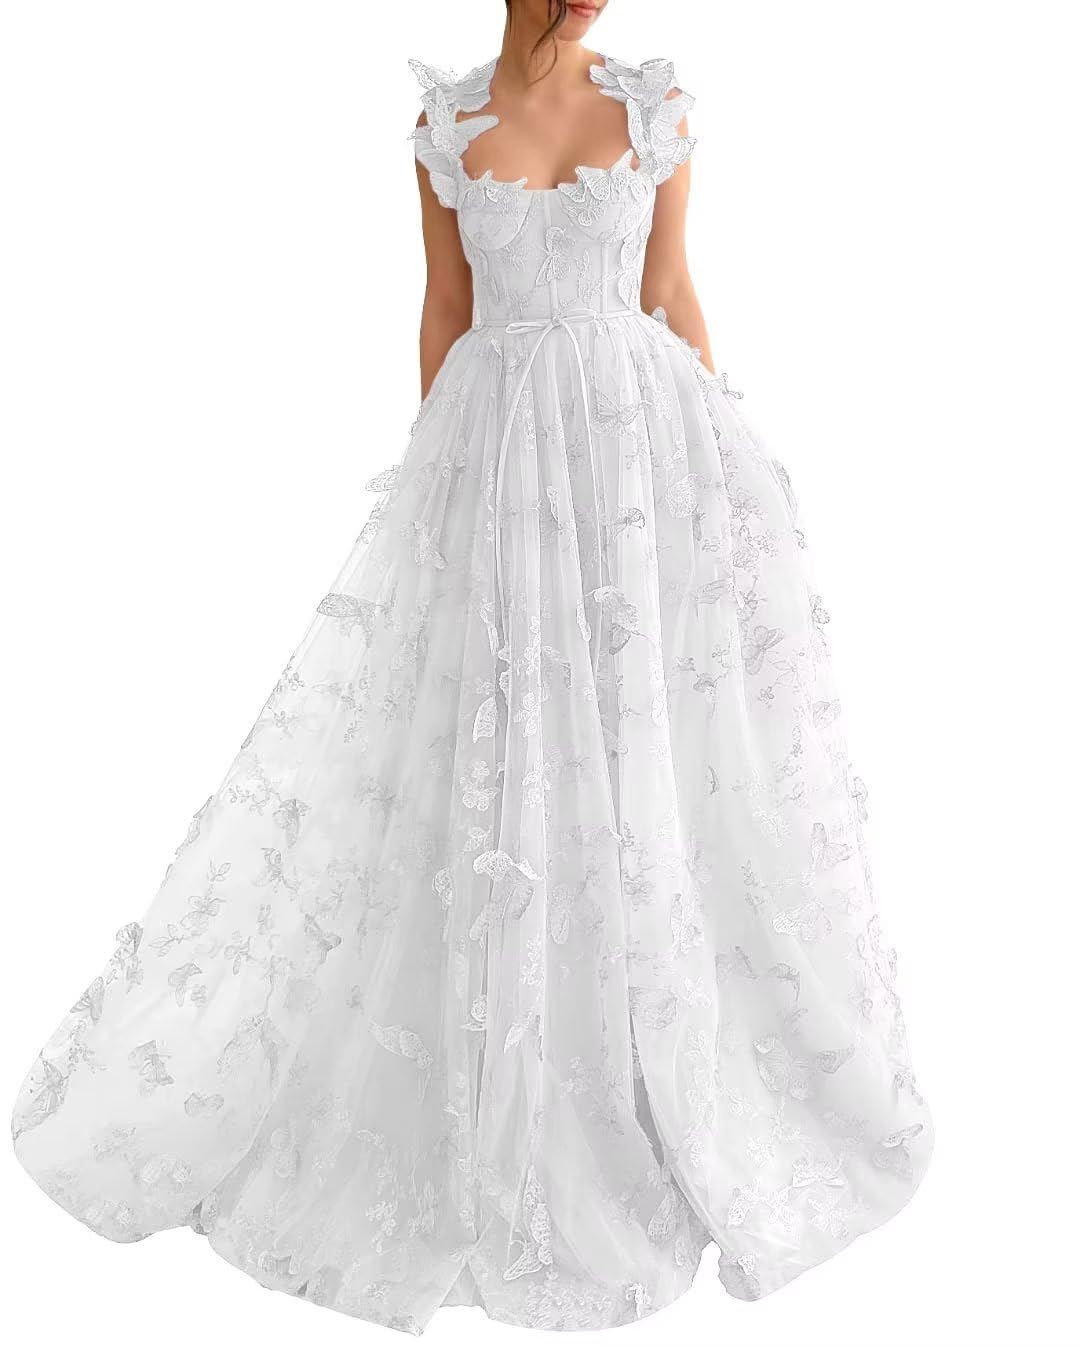 Long Tulle Prom Dress with 3D Butterflies Floor Length Formal Evening